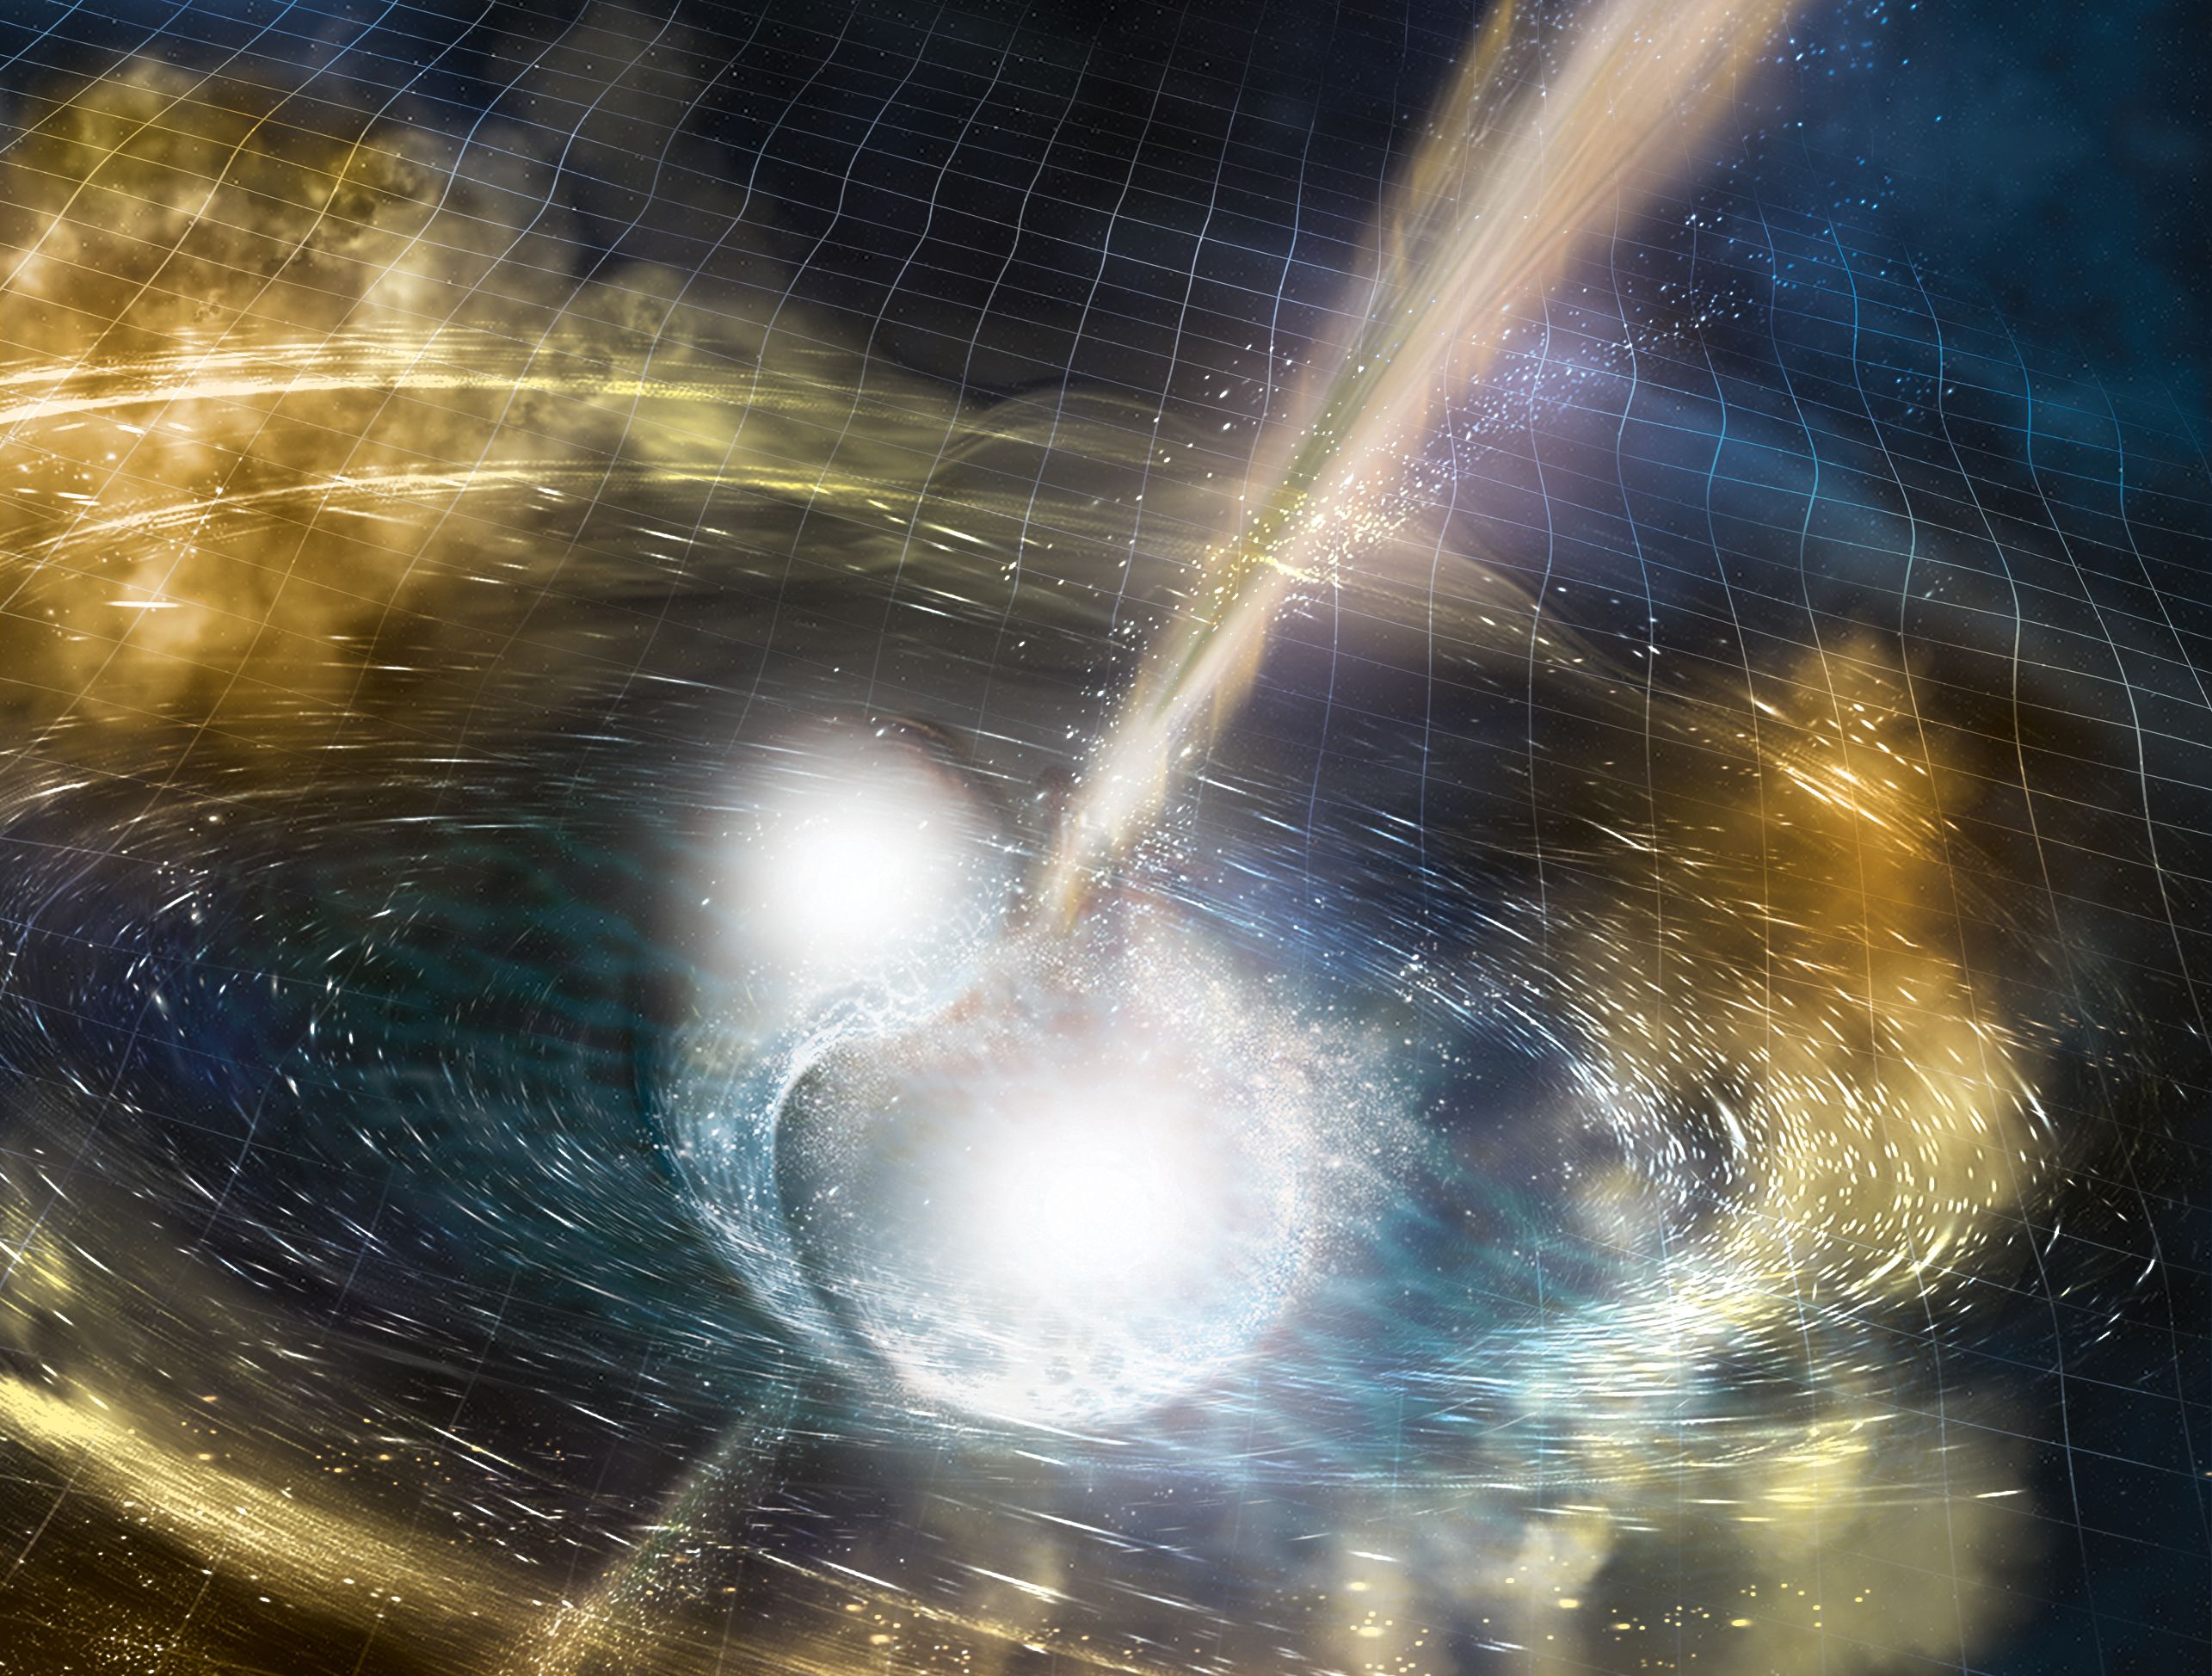 At the center of this illustration is a bright region of light that looks like two balls that haven’t quite merged into one. Two rays of white and orange light emanate from that central collision, one up and to the right, the other down and to the left, though you can’t see the one to the left quite as well because there is also a disk of swirling material blocking the view. There is also a faint grid across the entire image, representing space-time. Ripples in the grid can be seen at the edges of the image, showing gravitational waves that had been emitted by the merger.